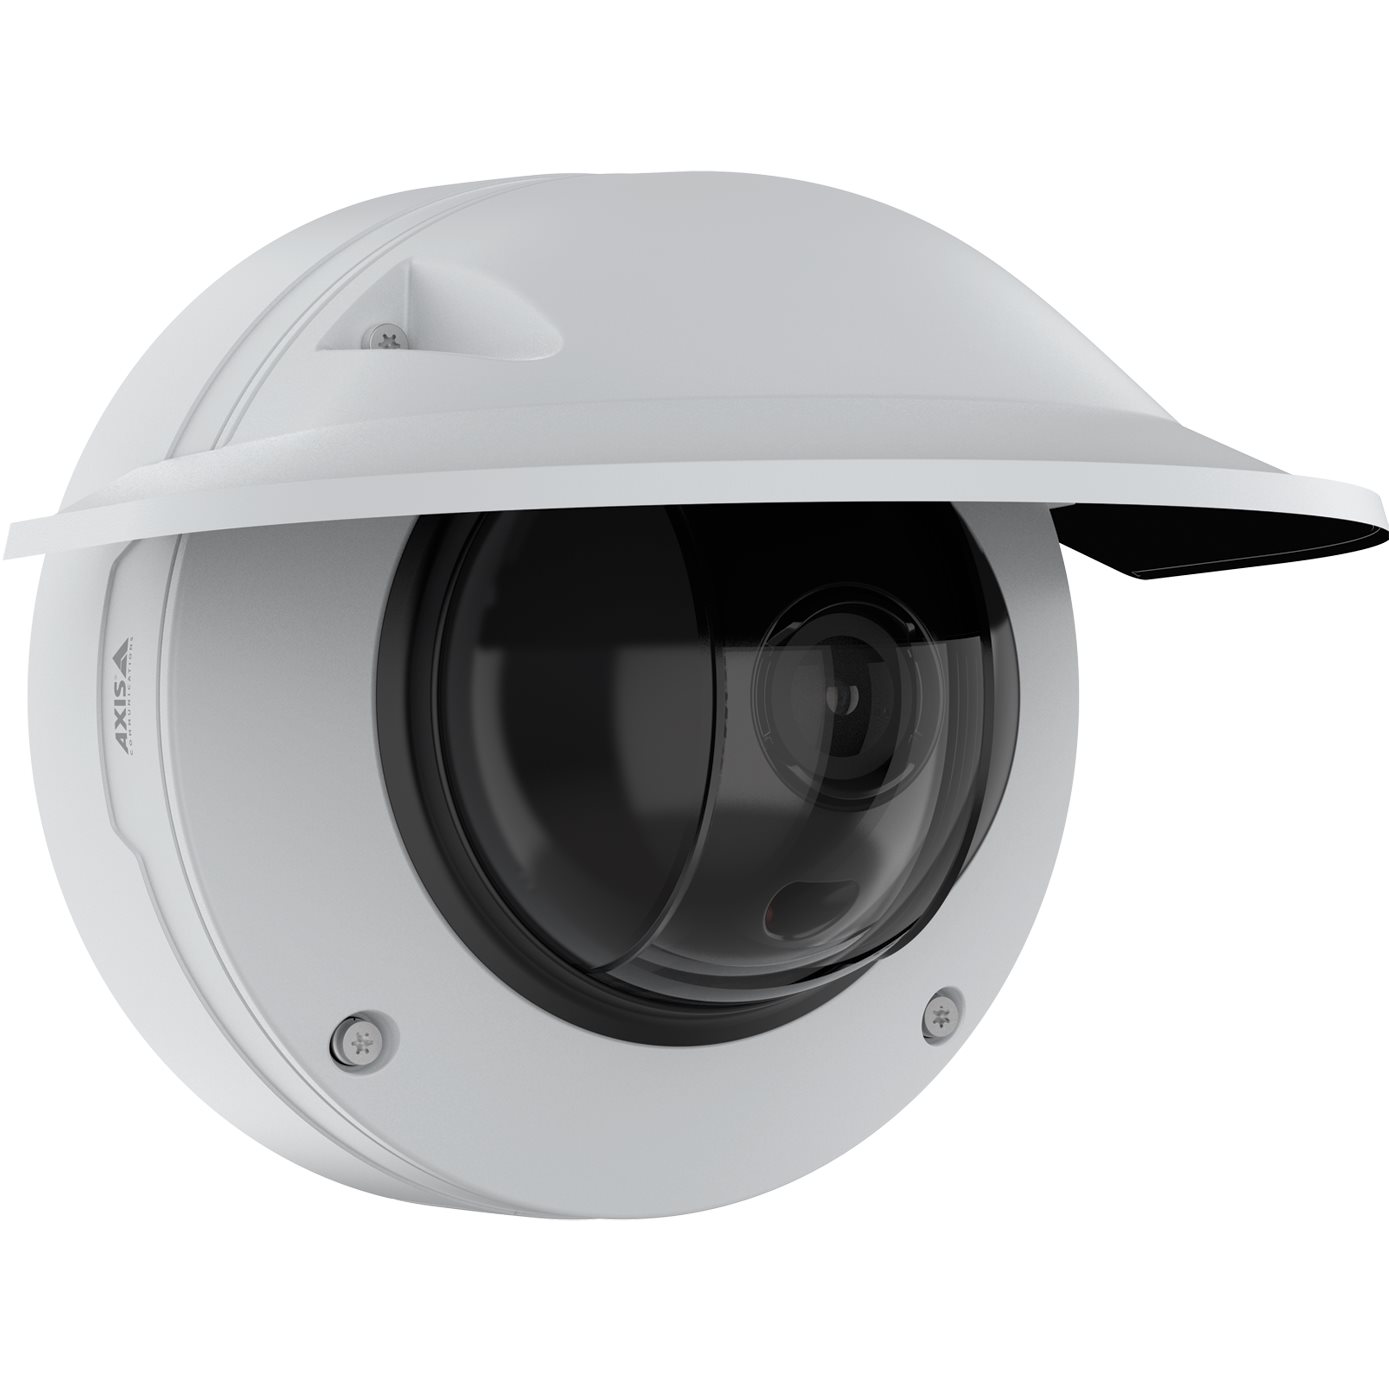 Camra Axis Q3538-LVE DOME CAMERA 02225-001